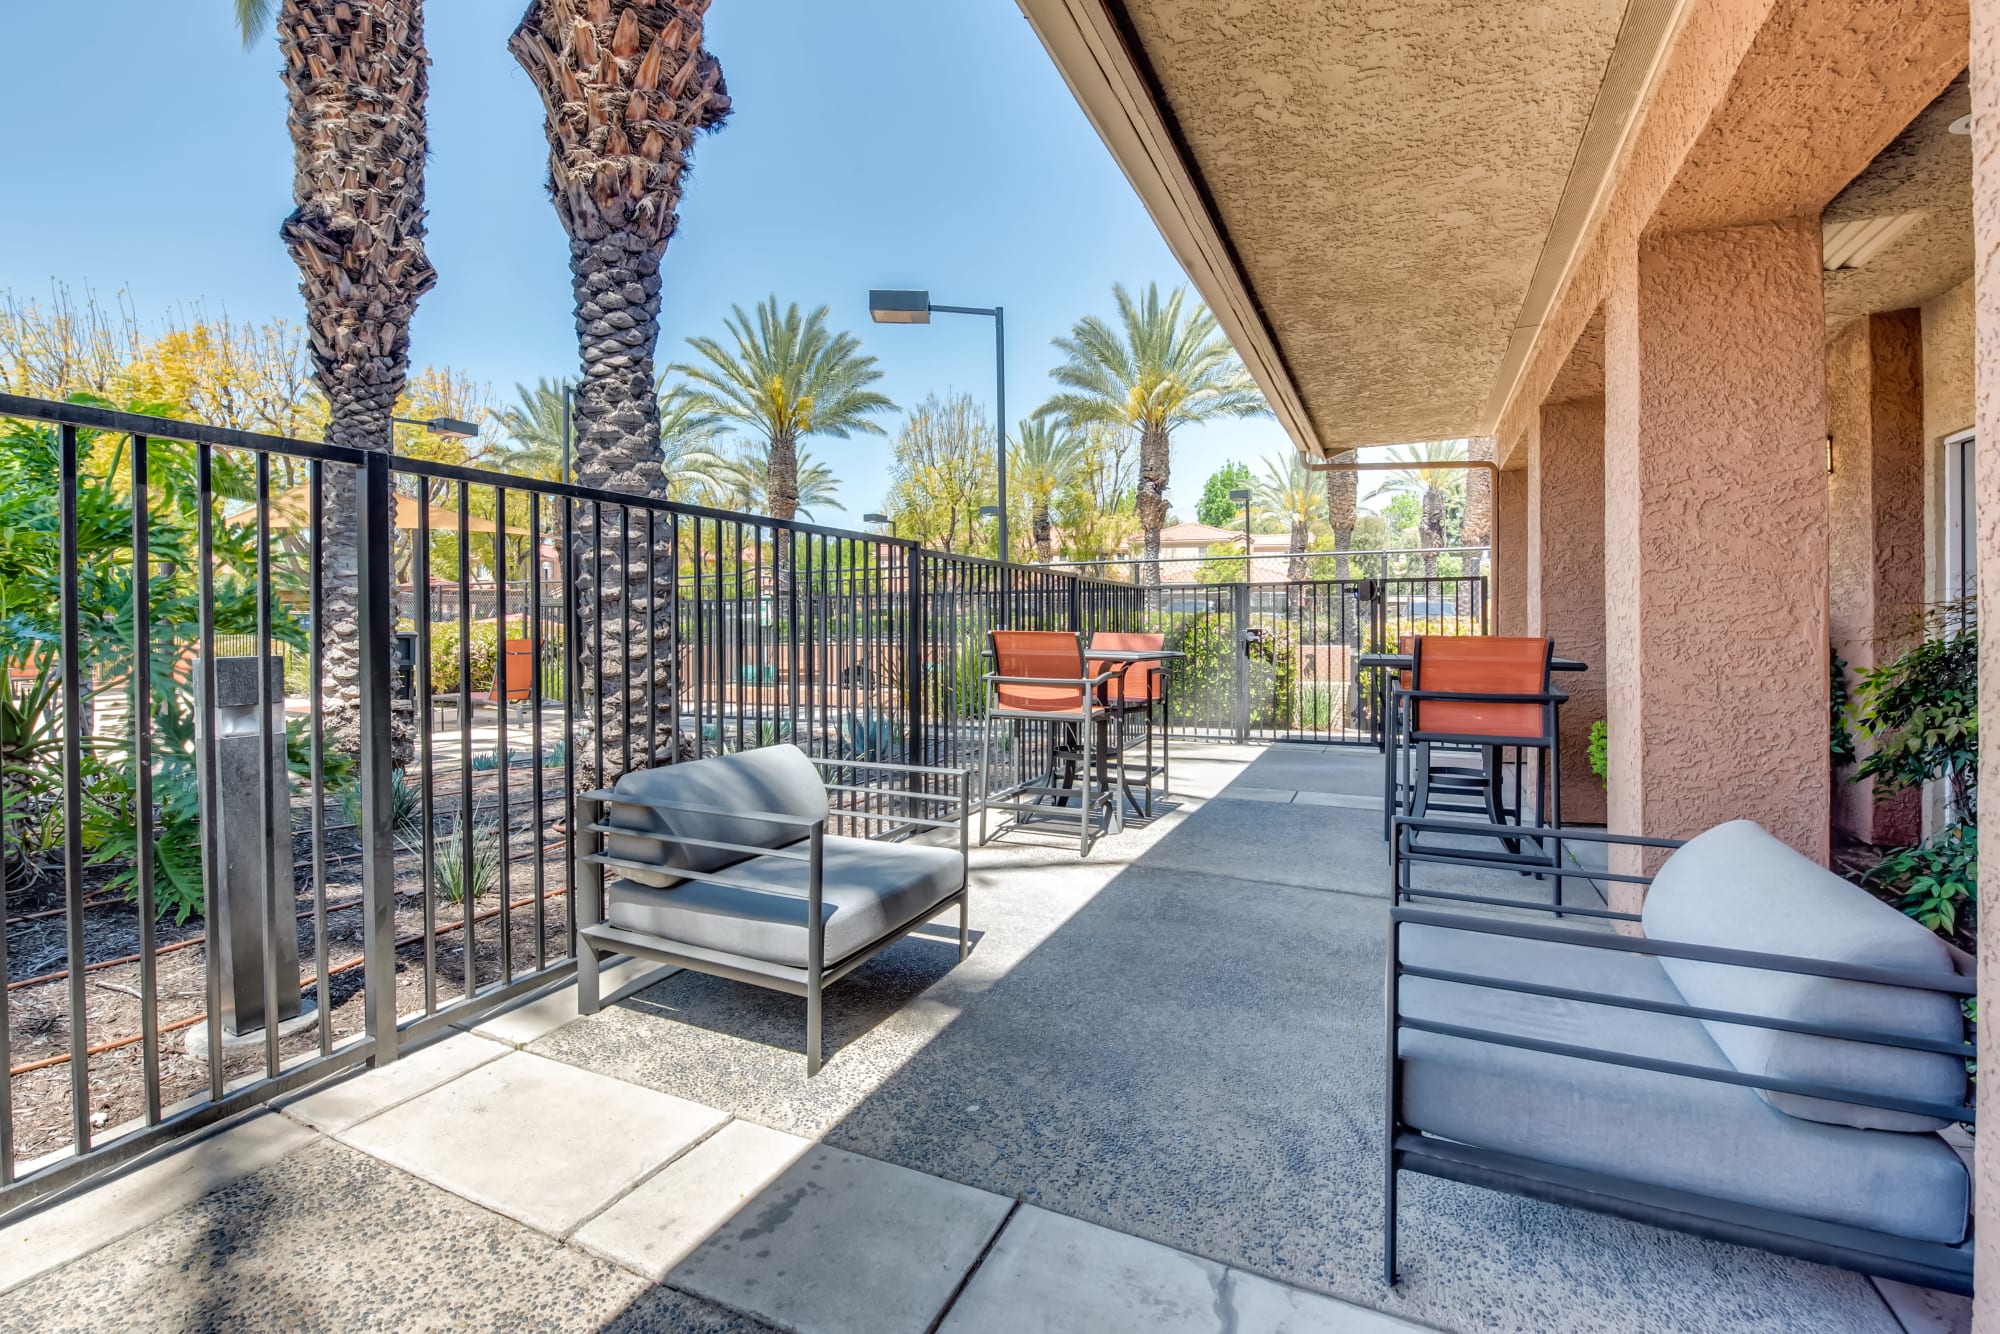 Outdoor wifi lounge area at Tuscany Village Apartments in Ontario, California